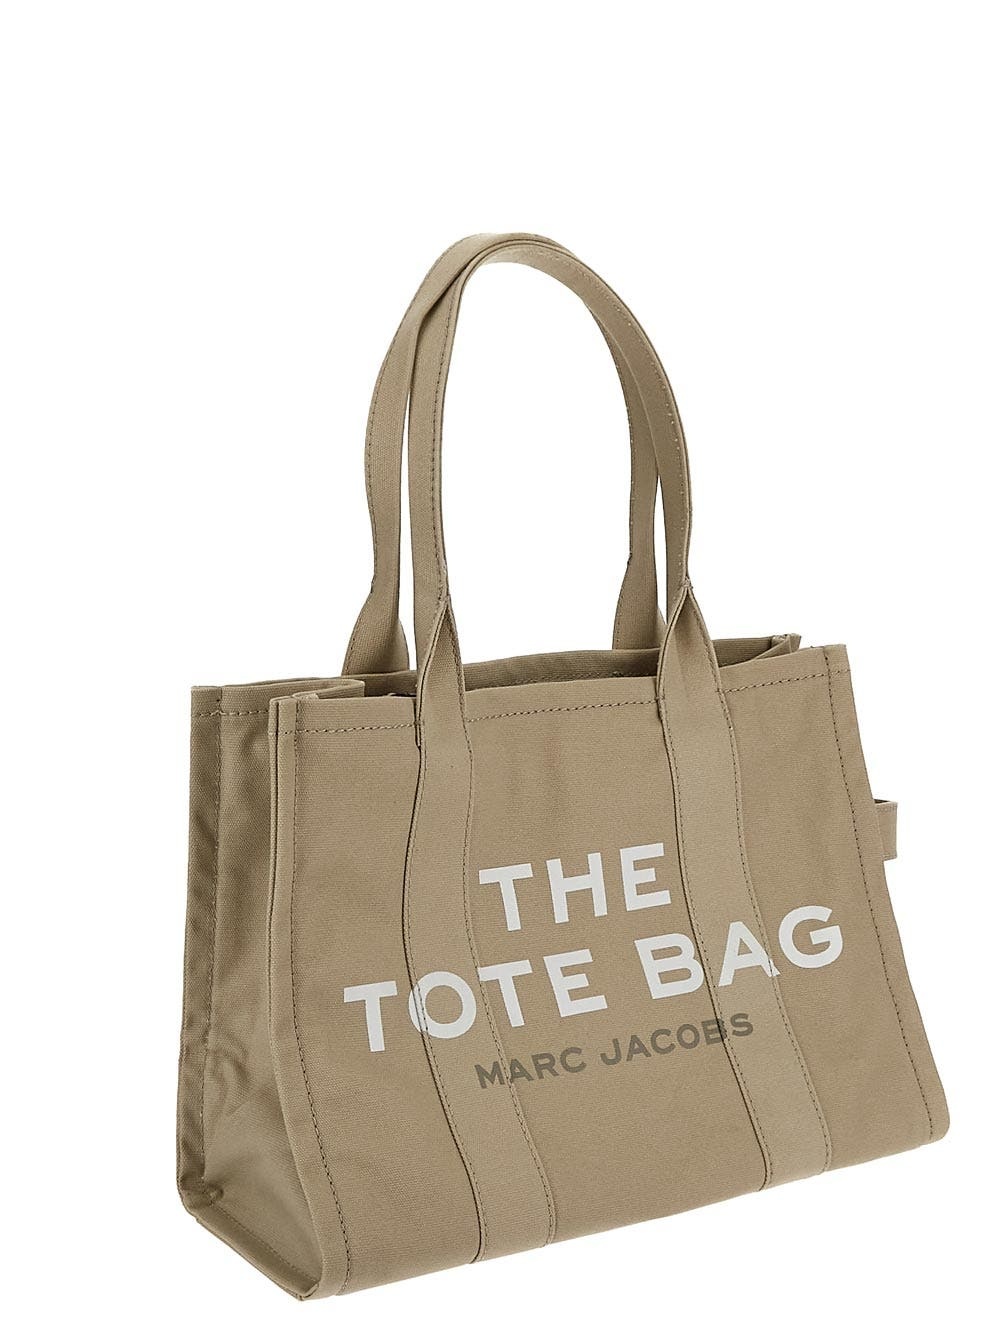 The Large Tote Bag - 2